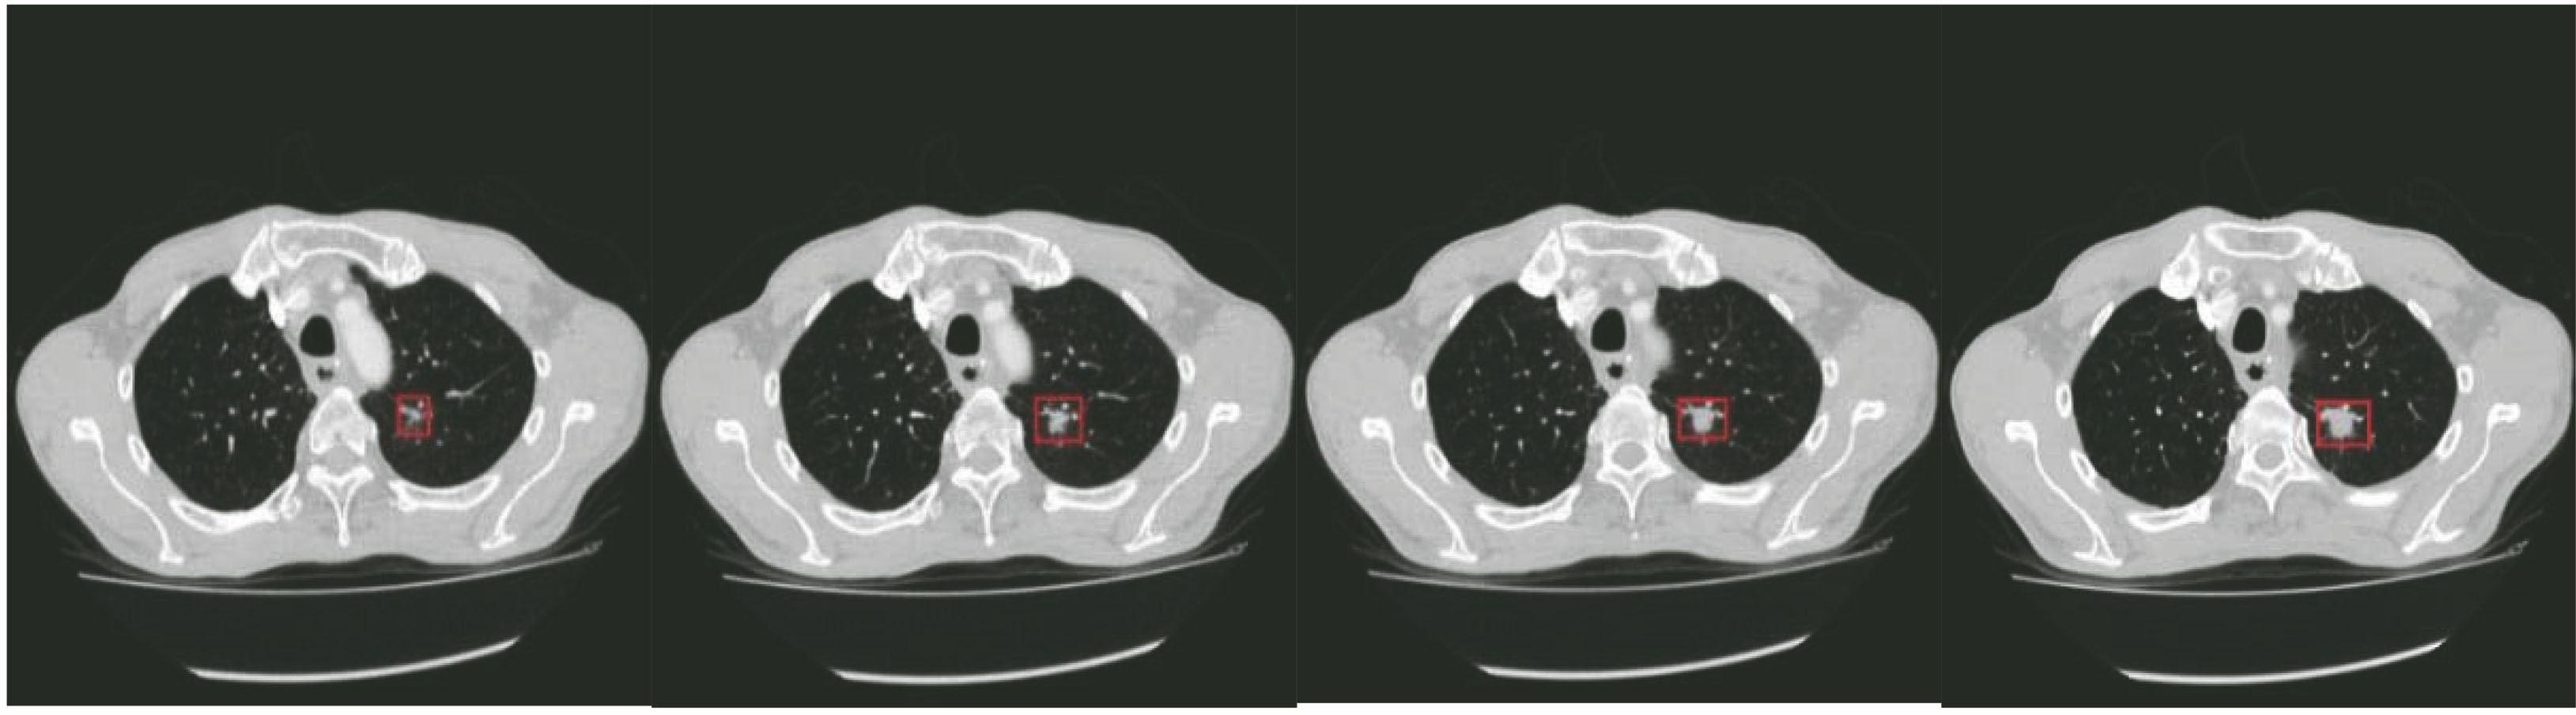 CT images of lung